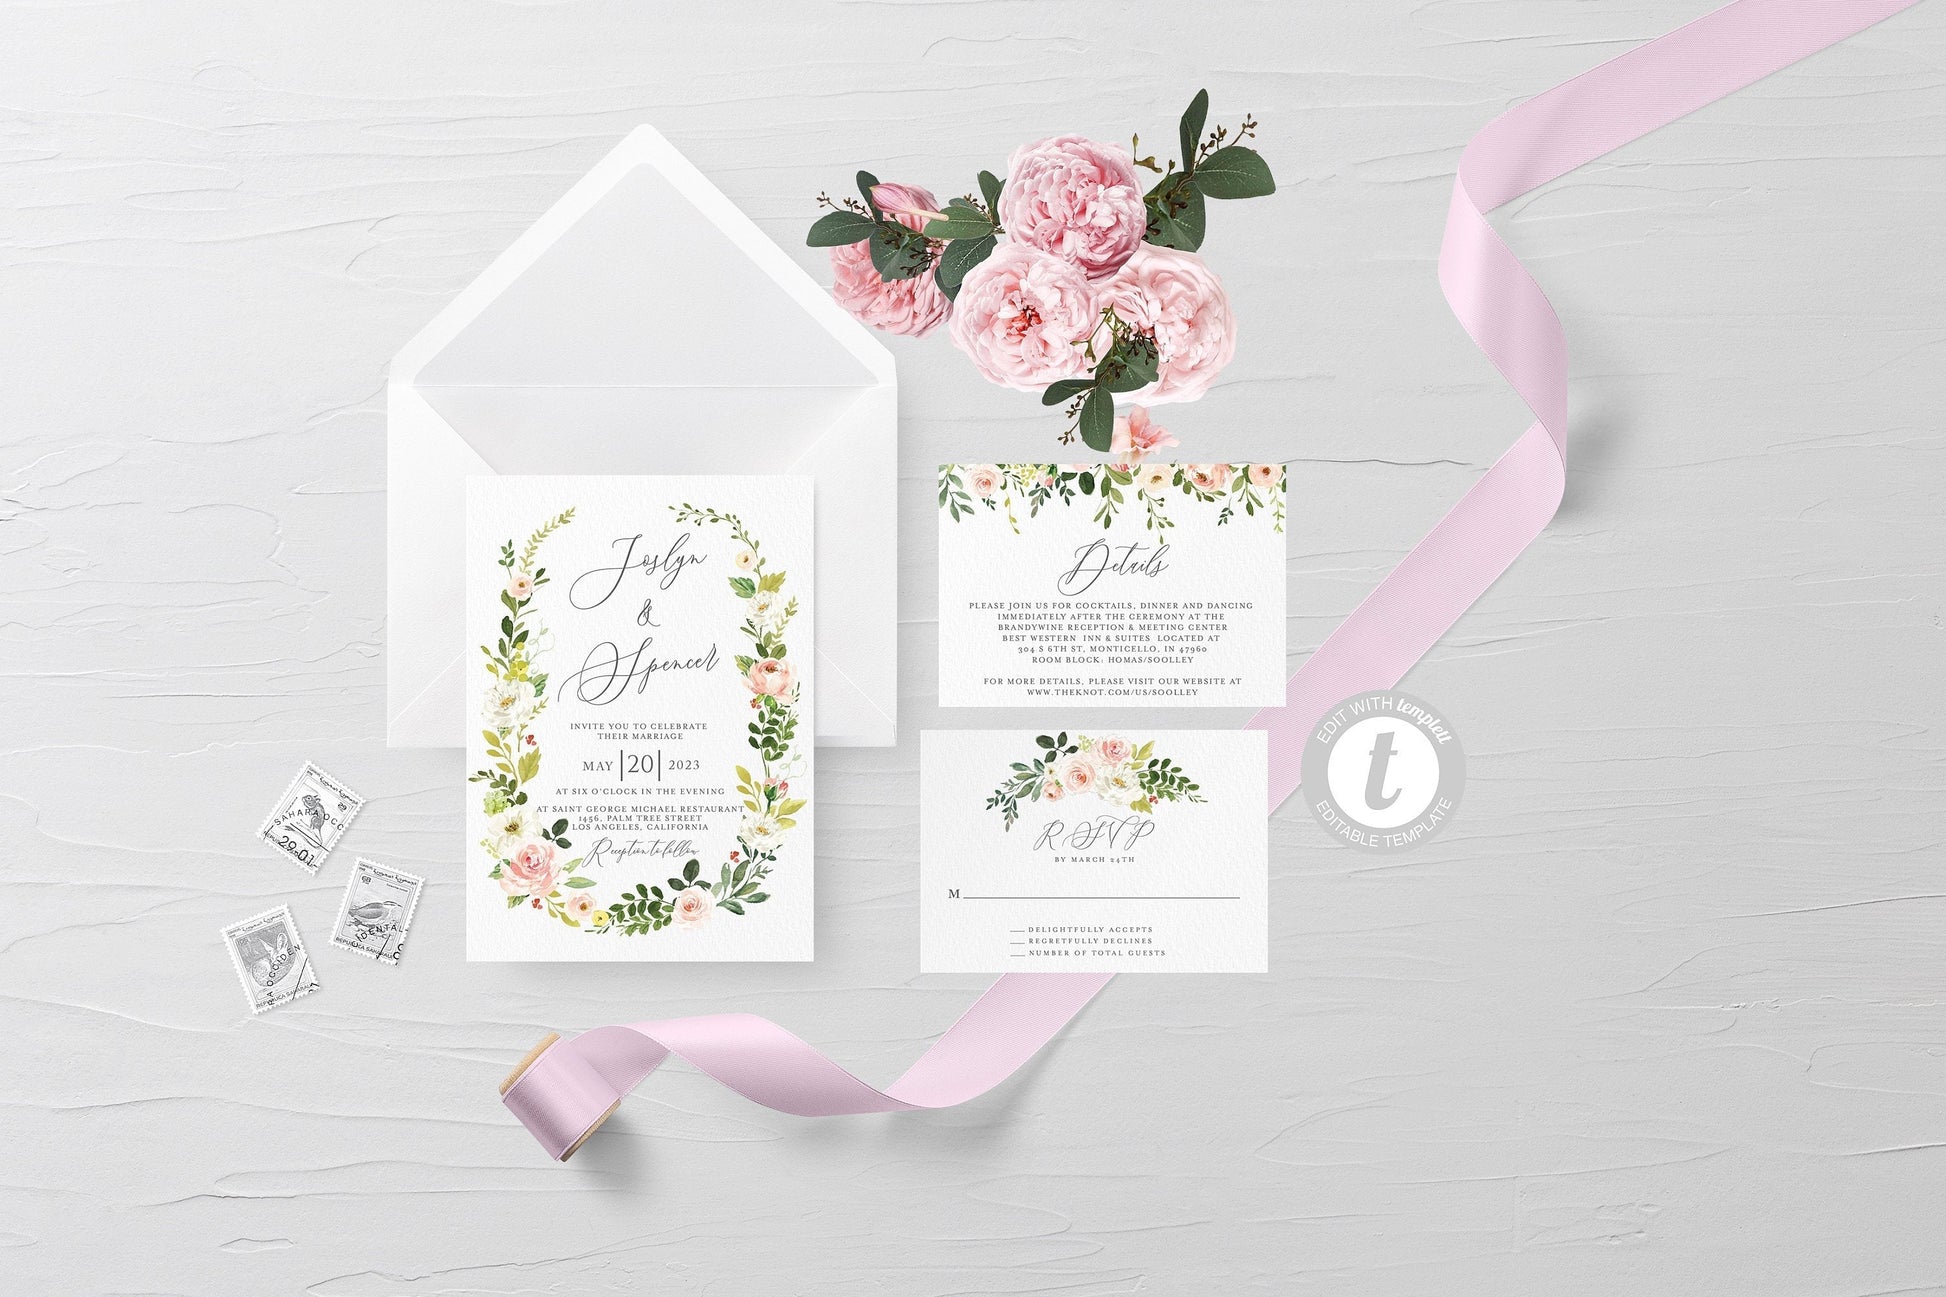 Printable Greenery Floral Wedding Invitation Set Editable Template, DIY Instant Download Invites, Invitation Suite 100% editable - JOSS WEDDING INVITATION SETS SAVVY PAPER CO